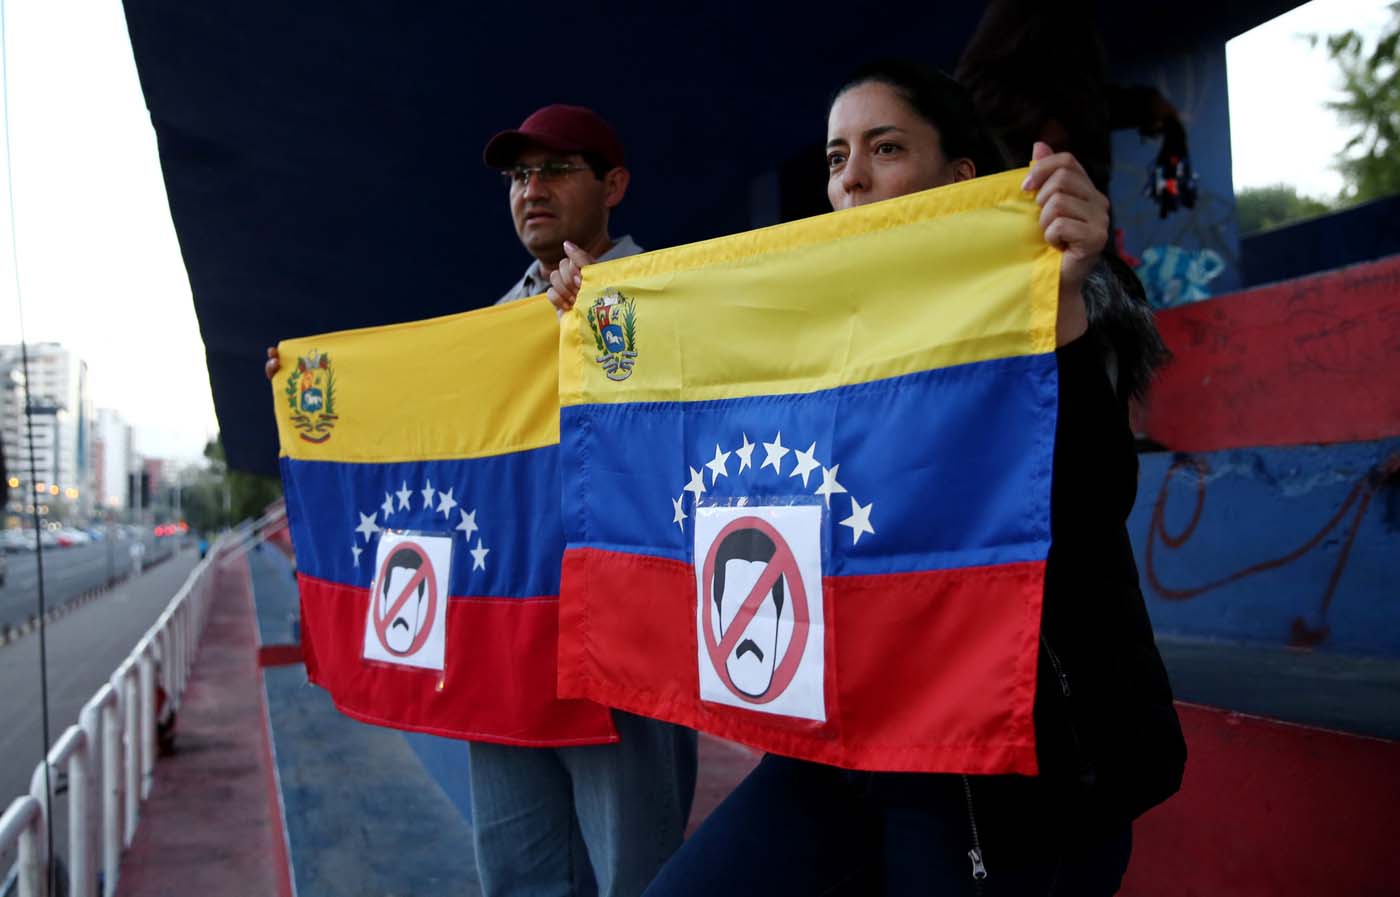 People holding Venezuelan flags protest against a visit by Venezuela's President Nicolas Maduro to Ecuador to attend President Lenin Moreno's inauguration, in Quito, Ecuador, May 23, 2017. REUTERS/Mariana Bazo